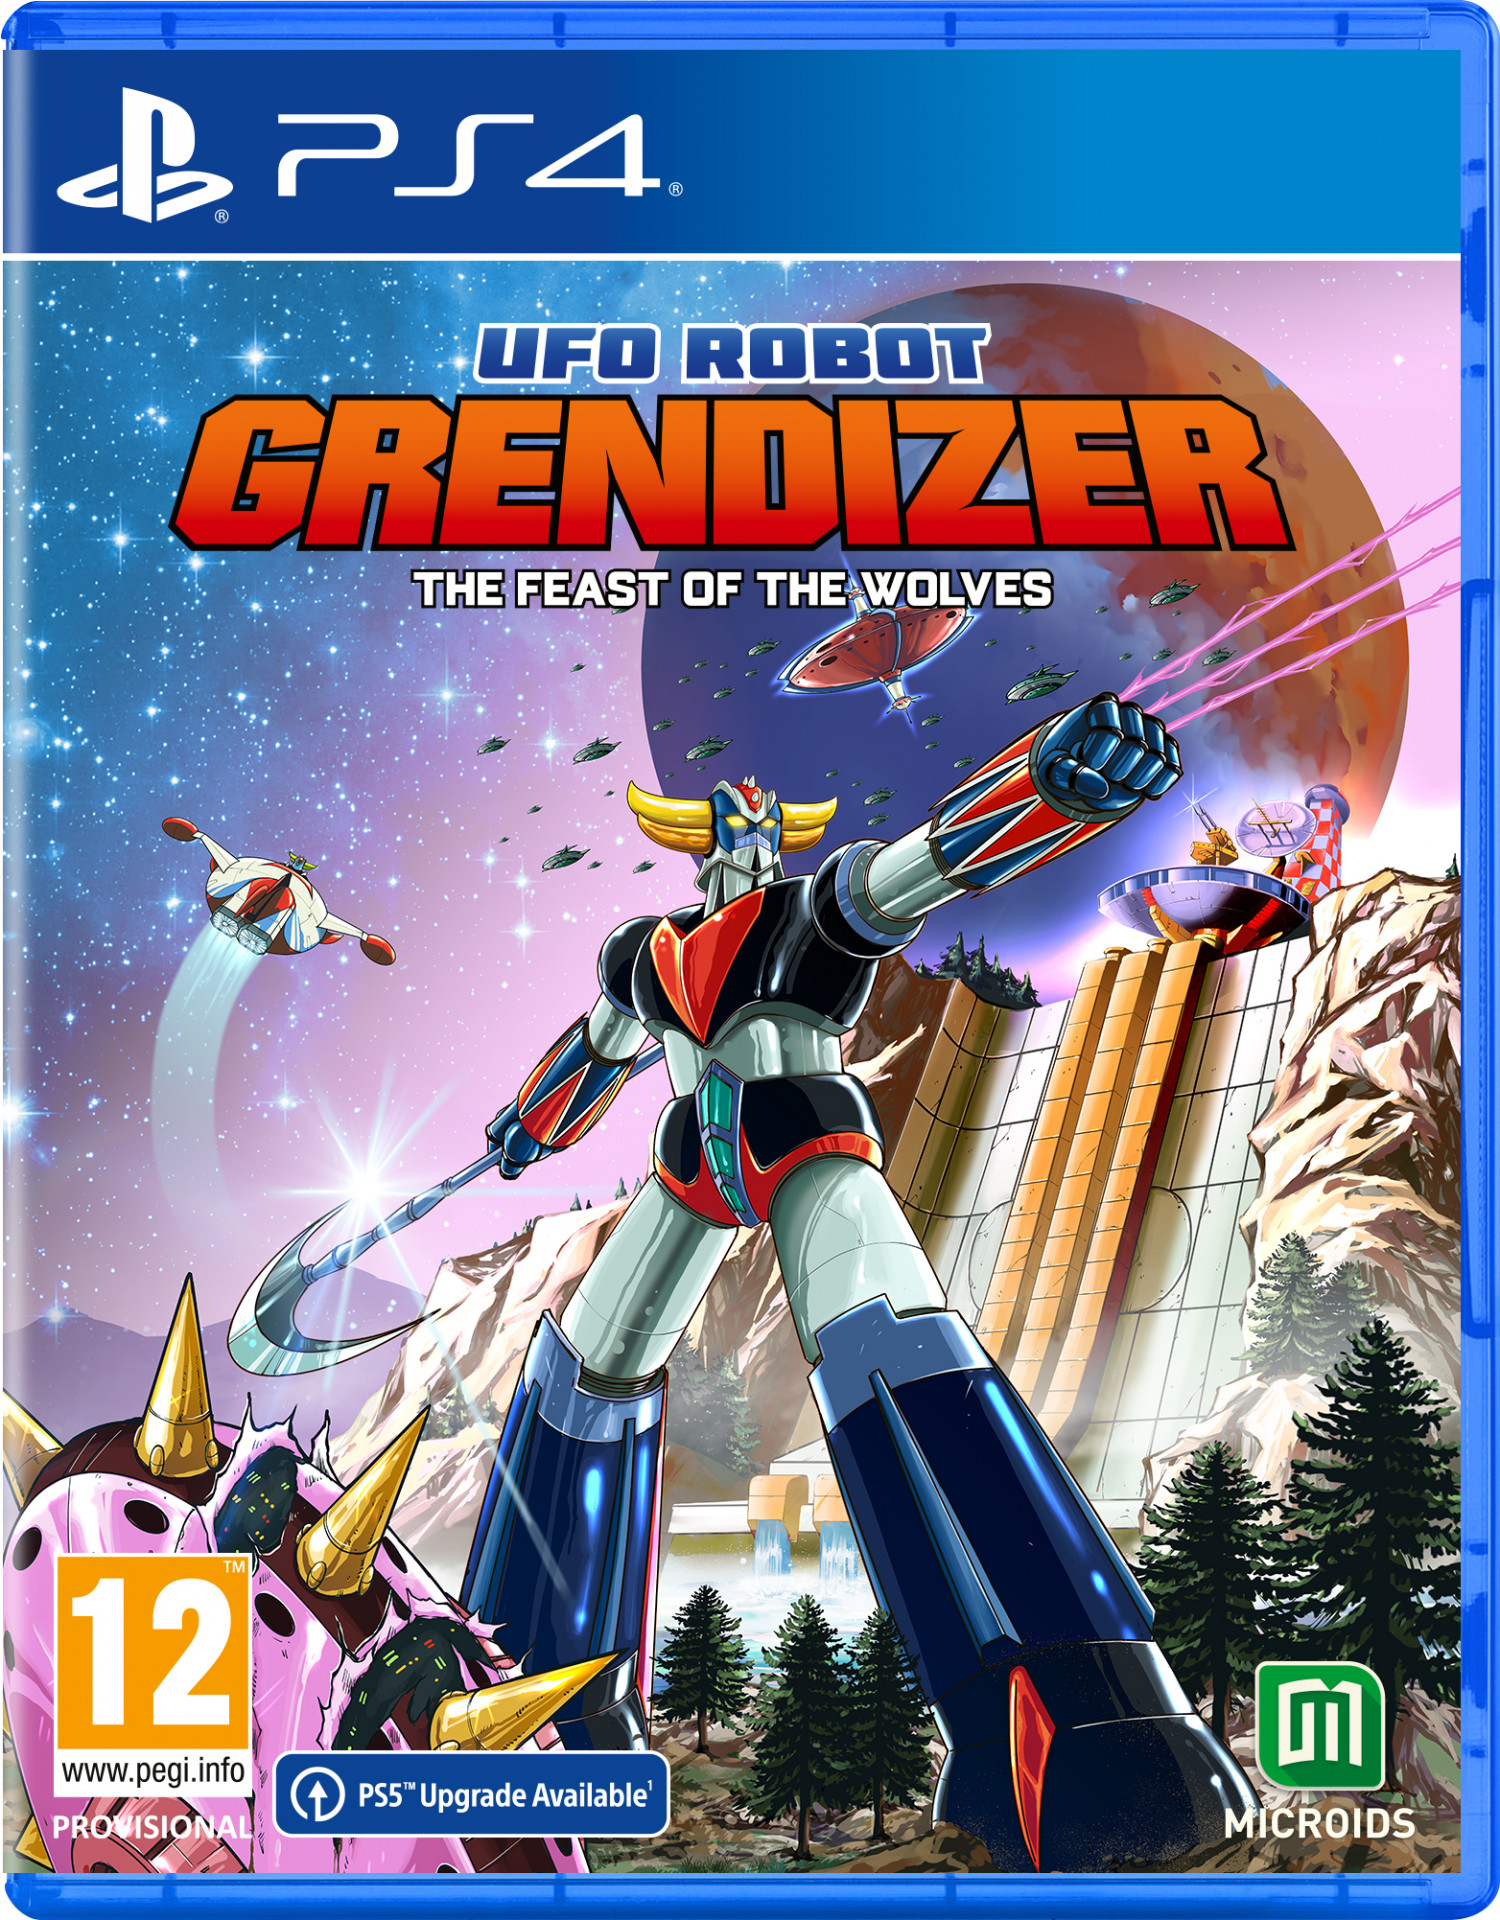 UFO Robot Grendizer: The Feast of the Wolves (PS4), Microids